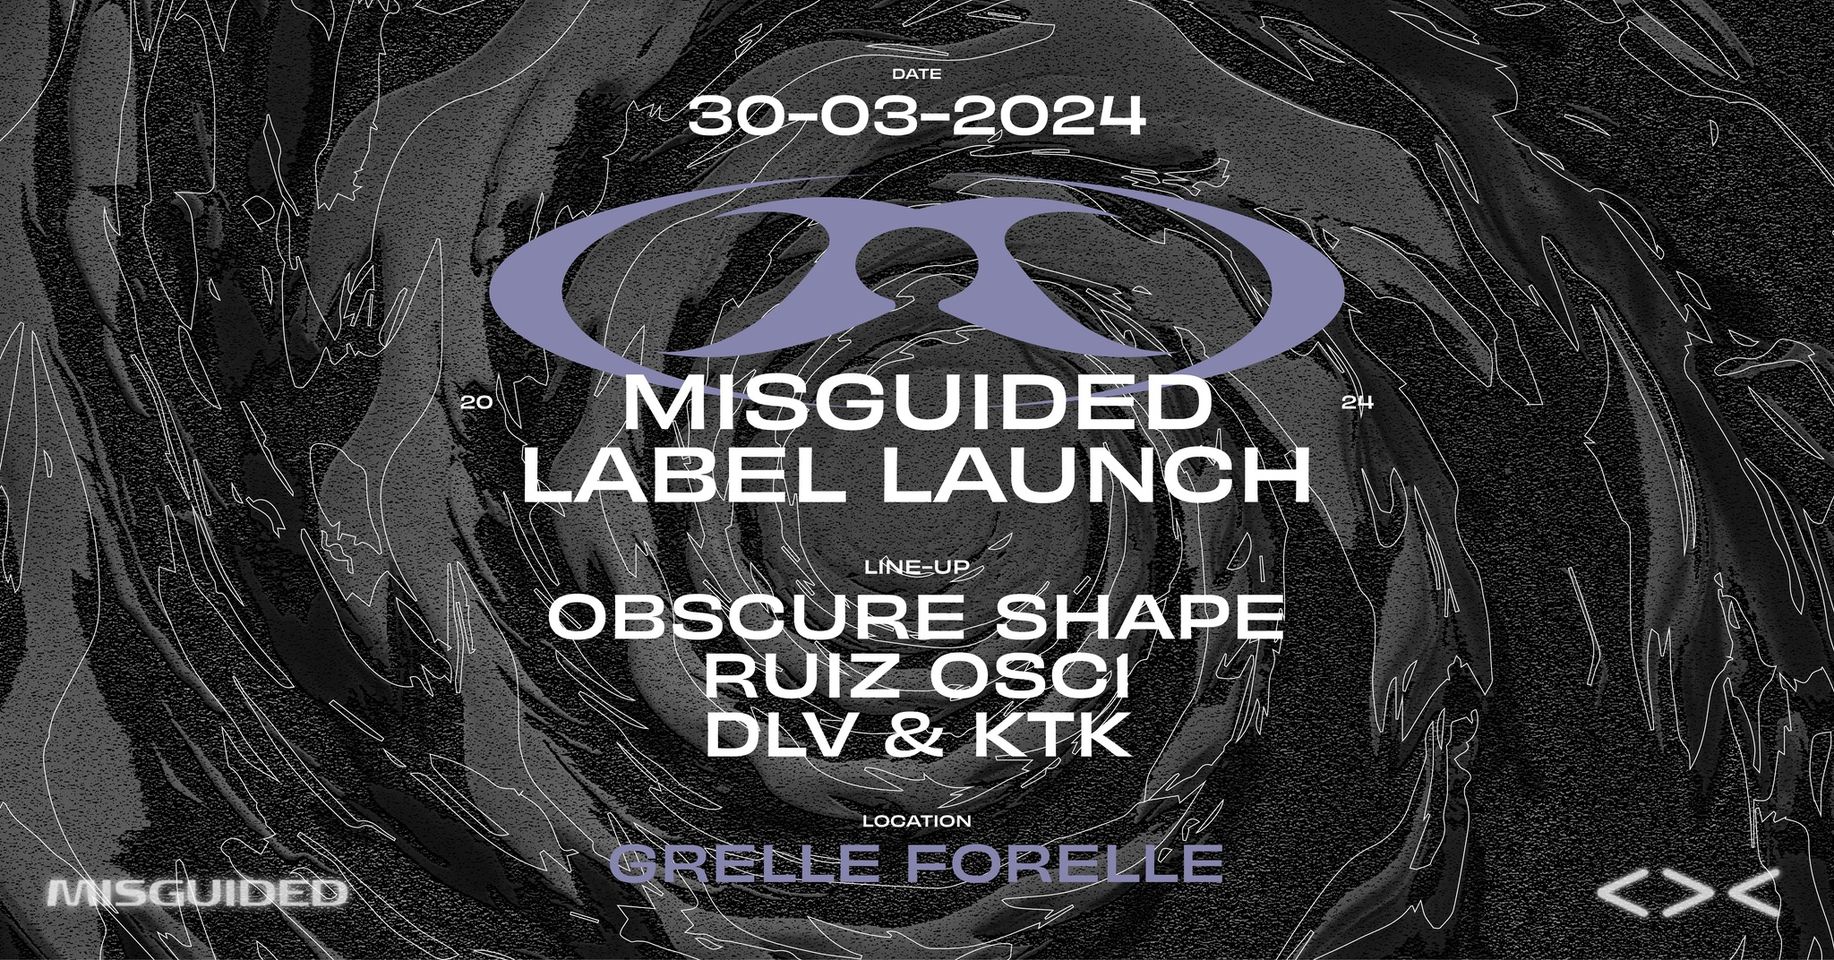 Misguided Label Launch am 30. March 2024 @ Grelle Forelle.